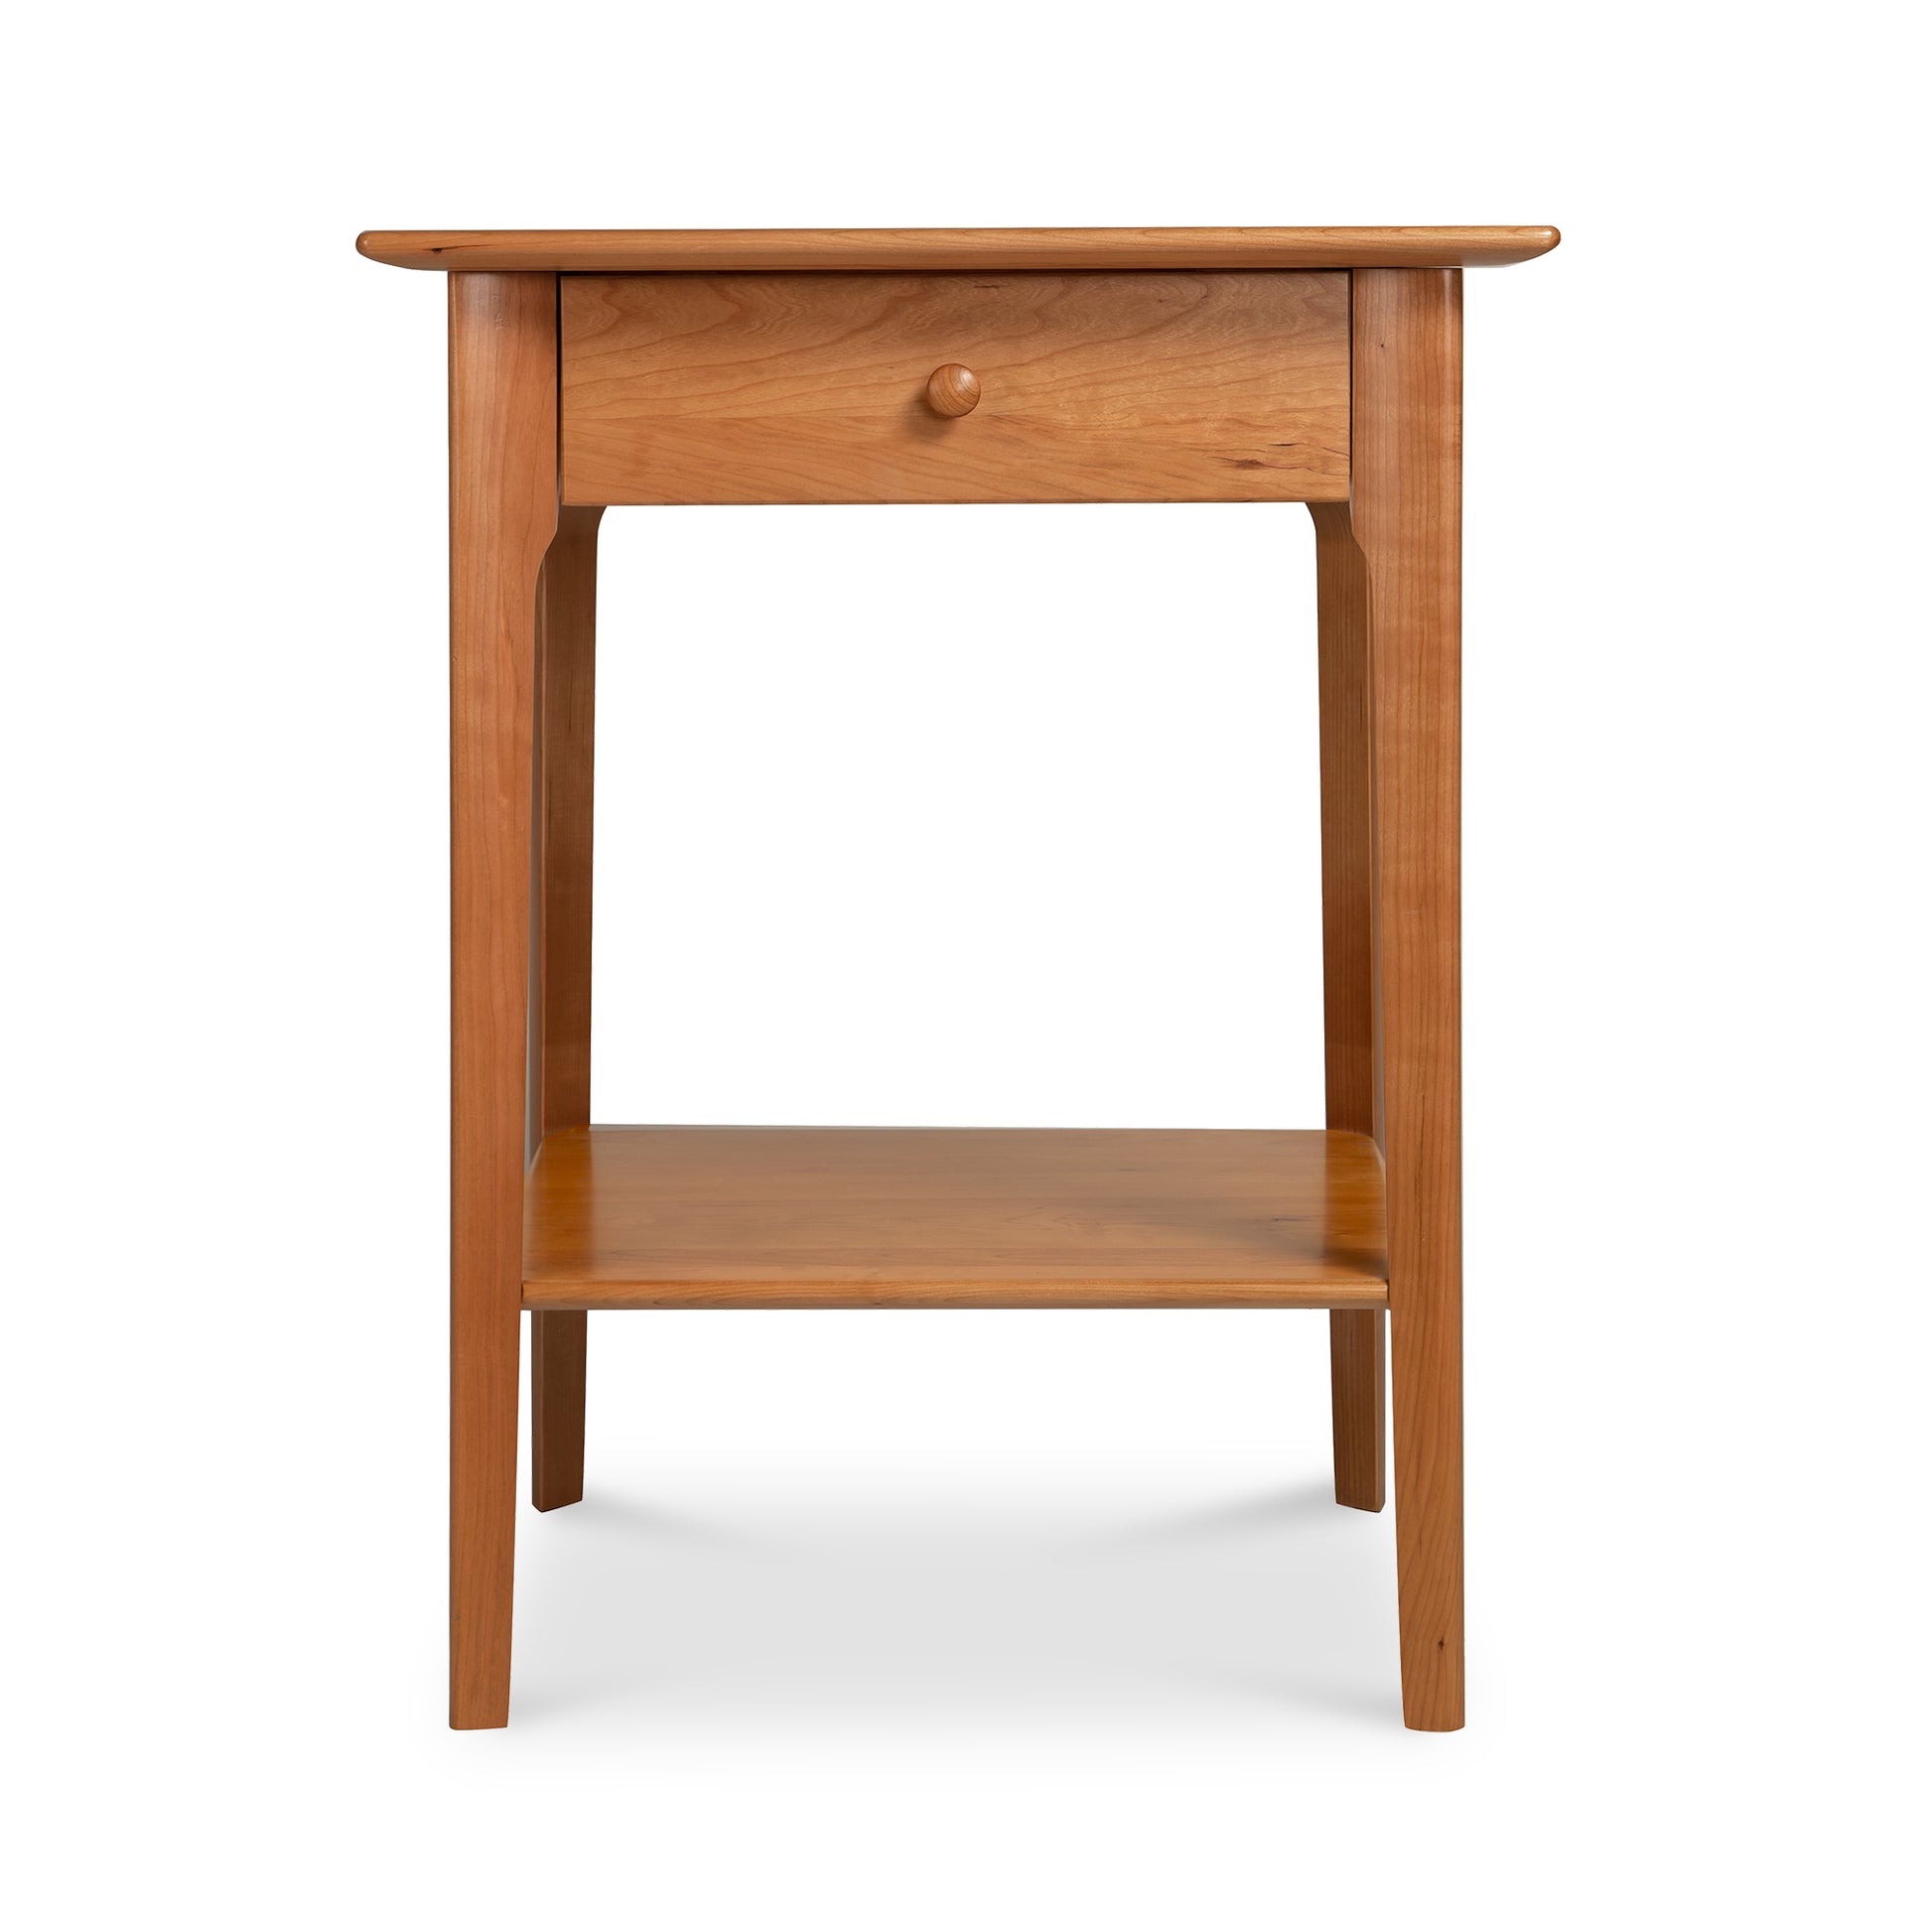 A Sarah 1-Drawer Open Shelf Nightstand by Copeland Furniture, isolated against a white background.